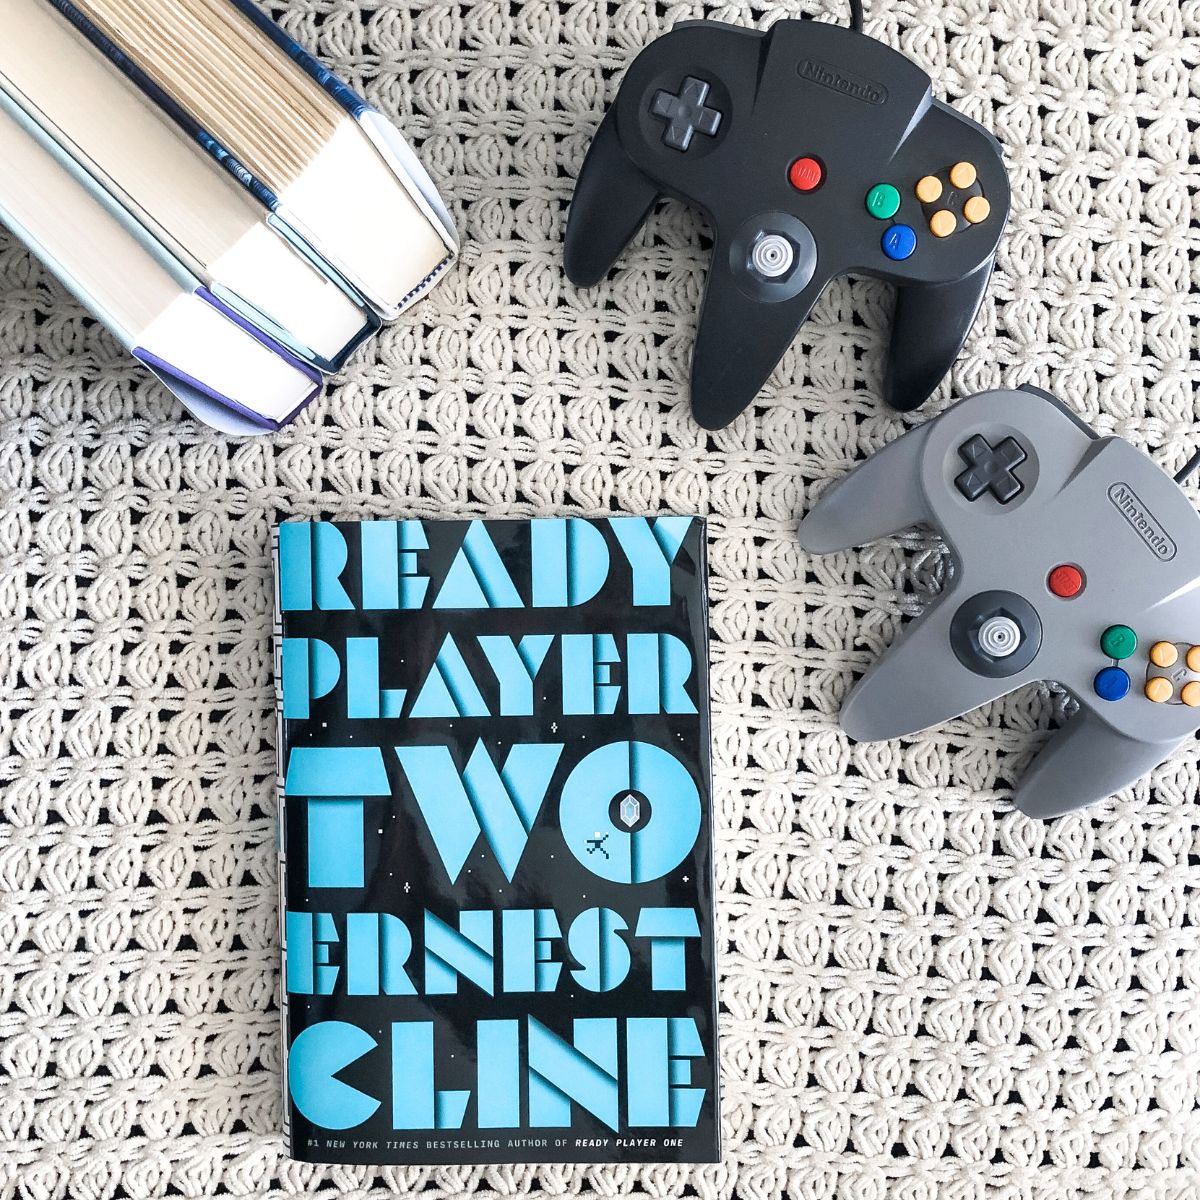 fiction books about video games with Nintendo 64 controllers on a white blanket